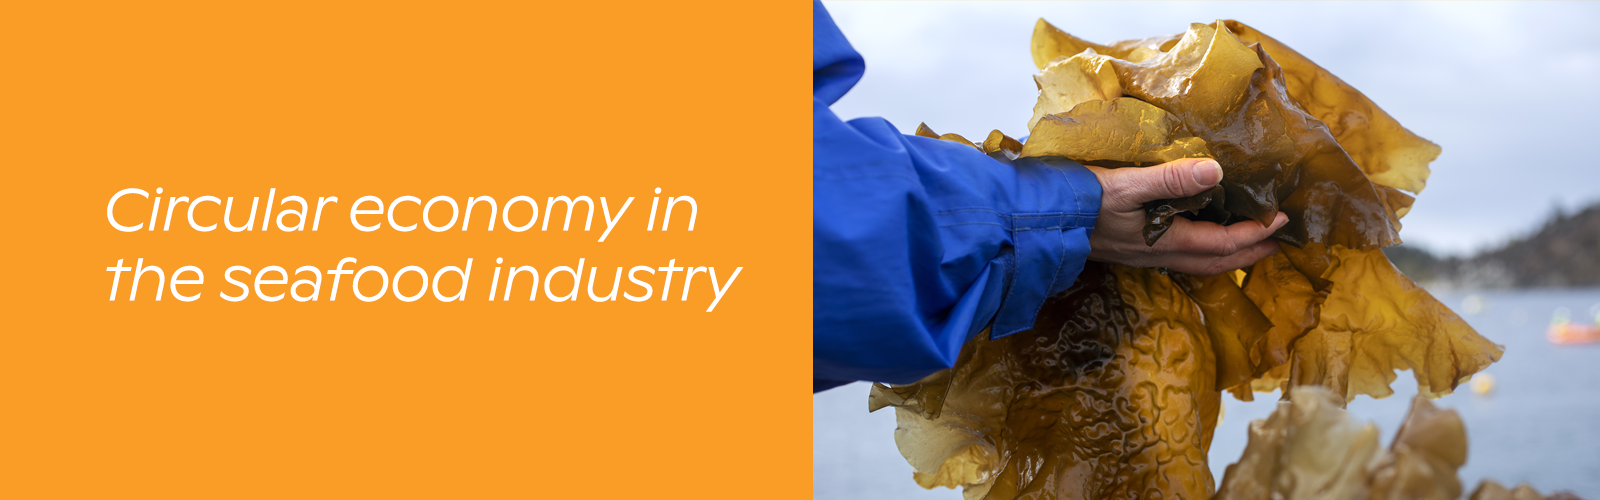 Banner_circular economy in the seafood industry